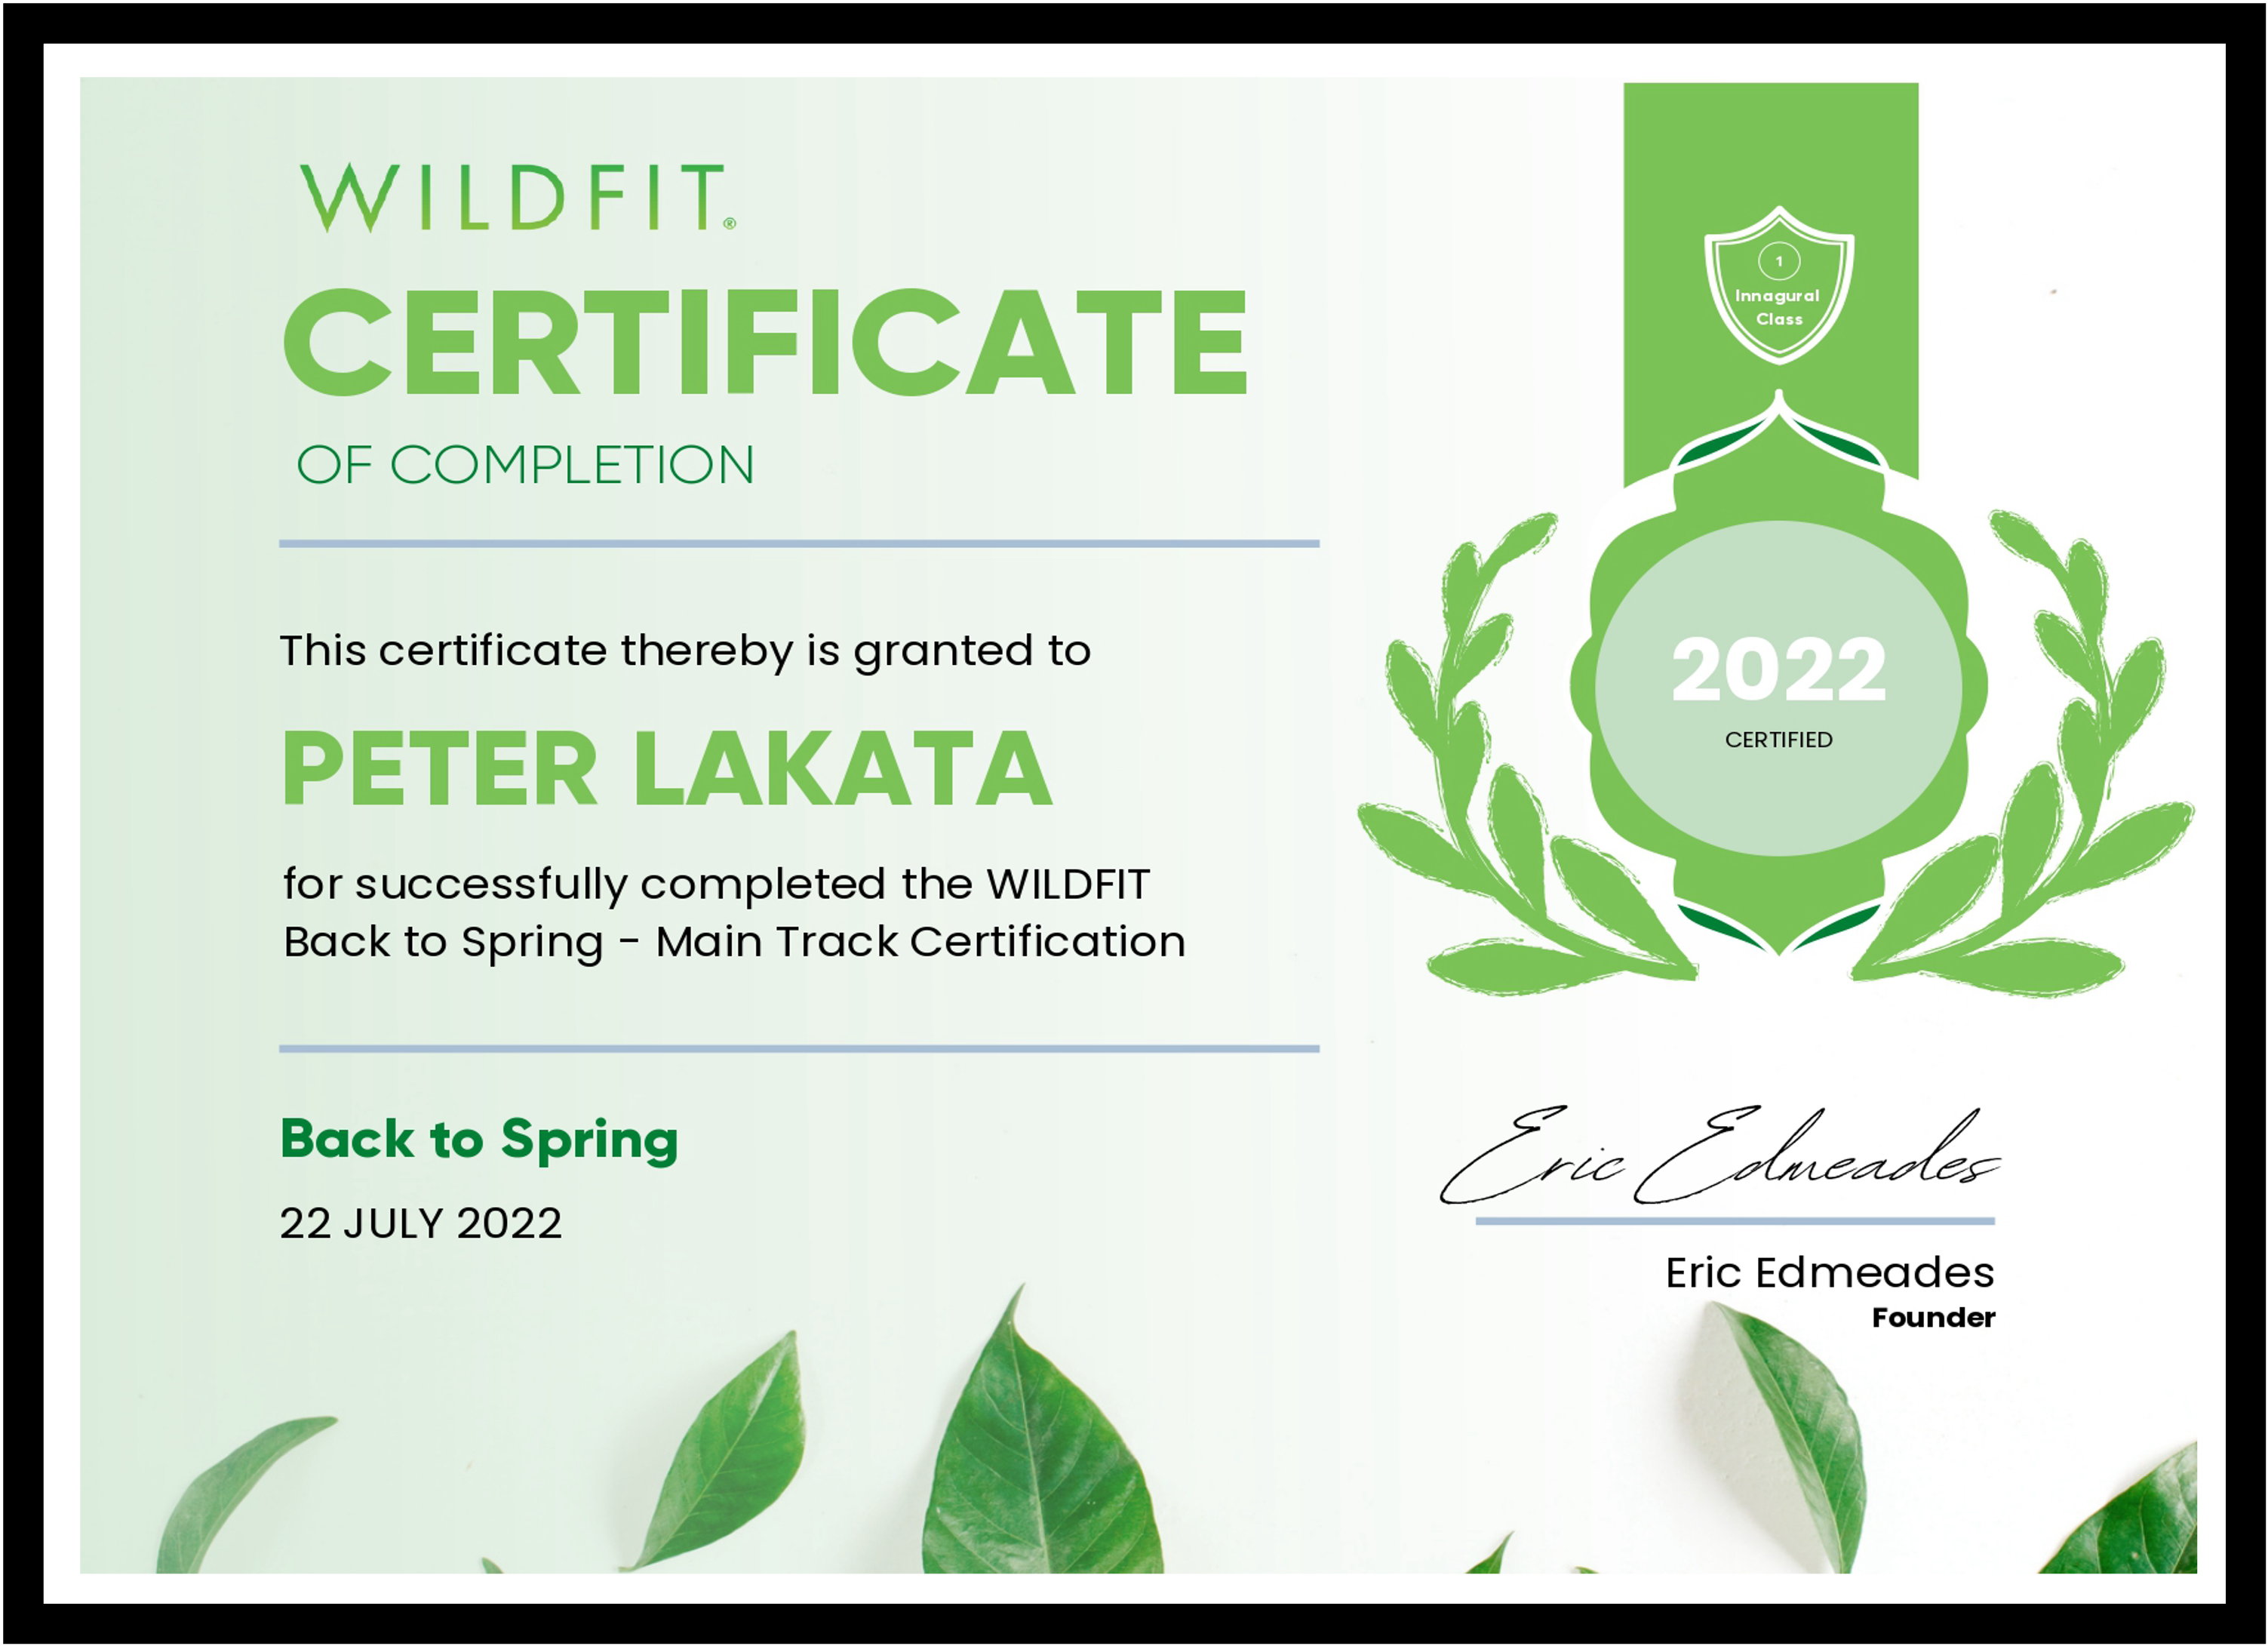 WILDFIT Back to spring certificate for Peter Lakata